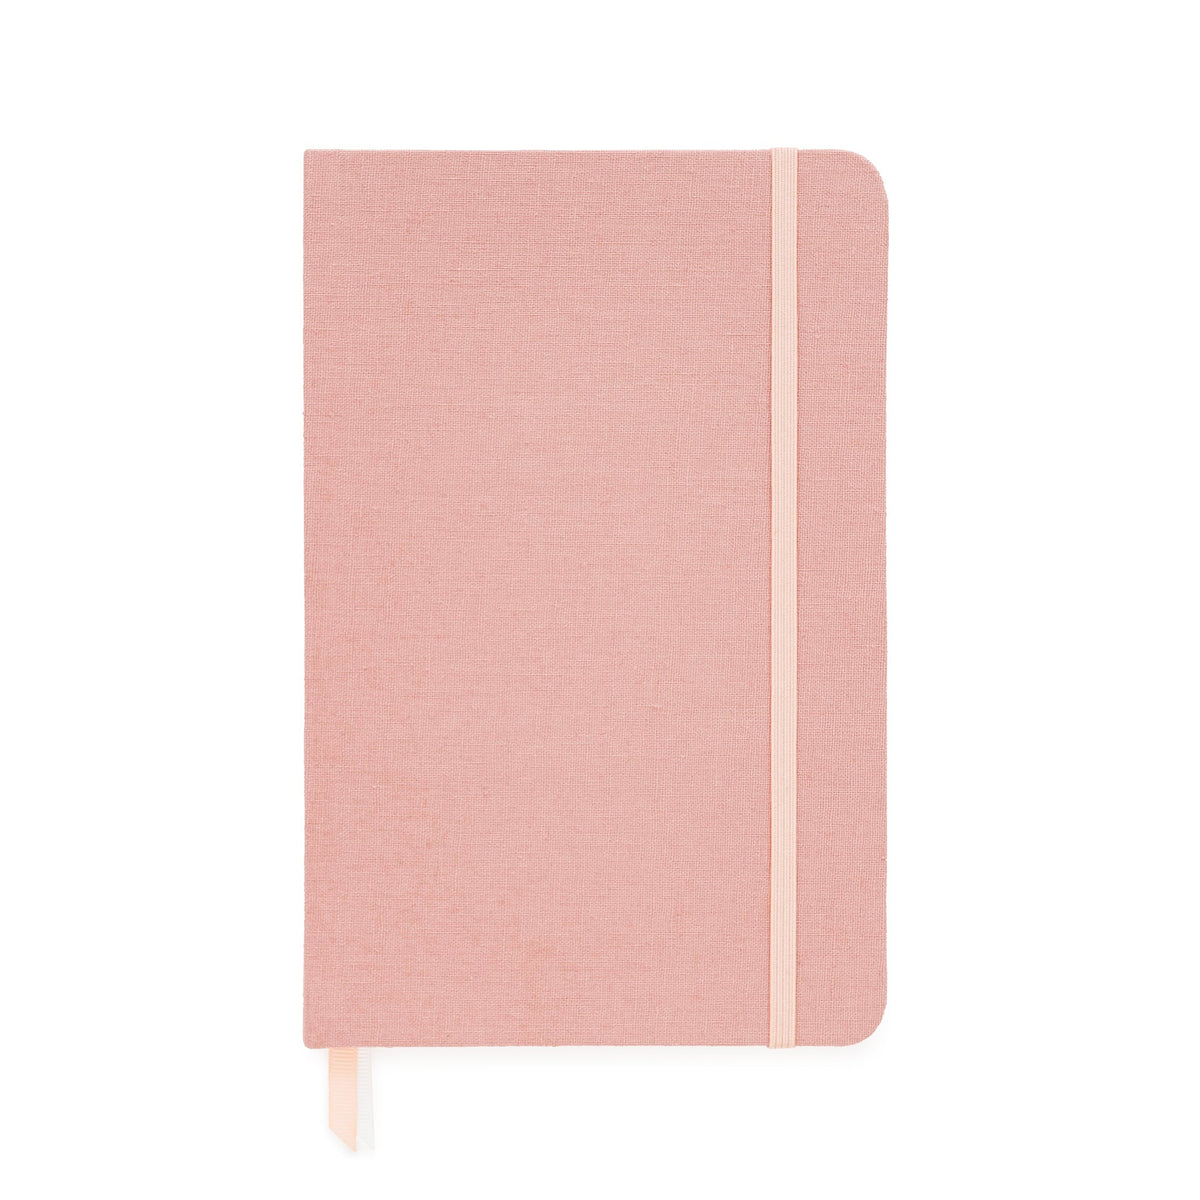 Rose fabric journal with pink elastic